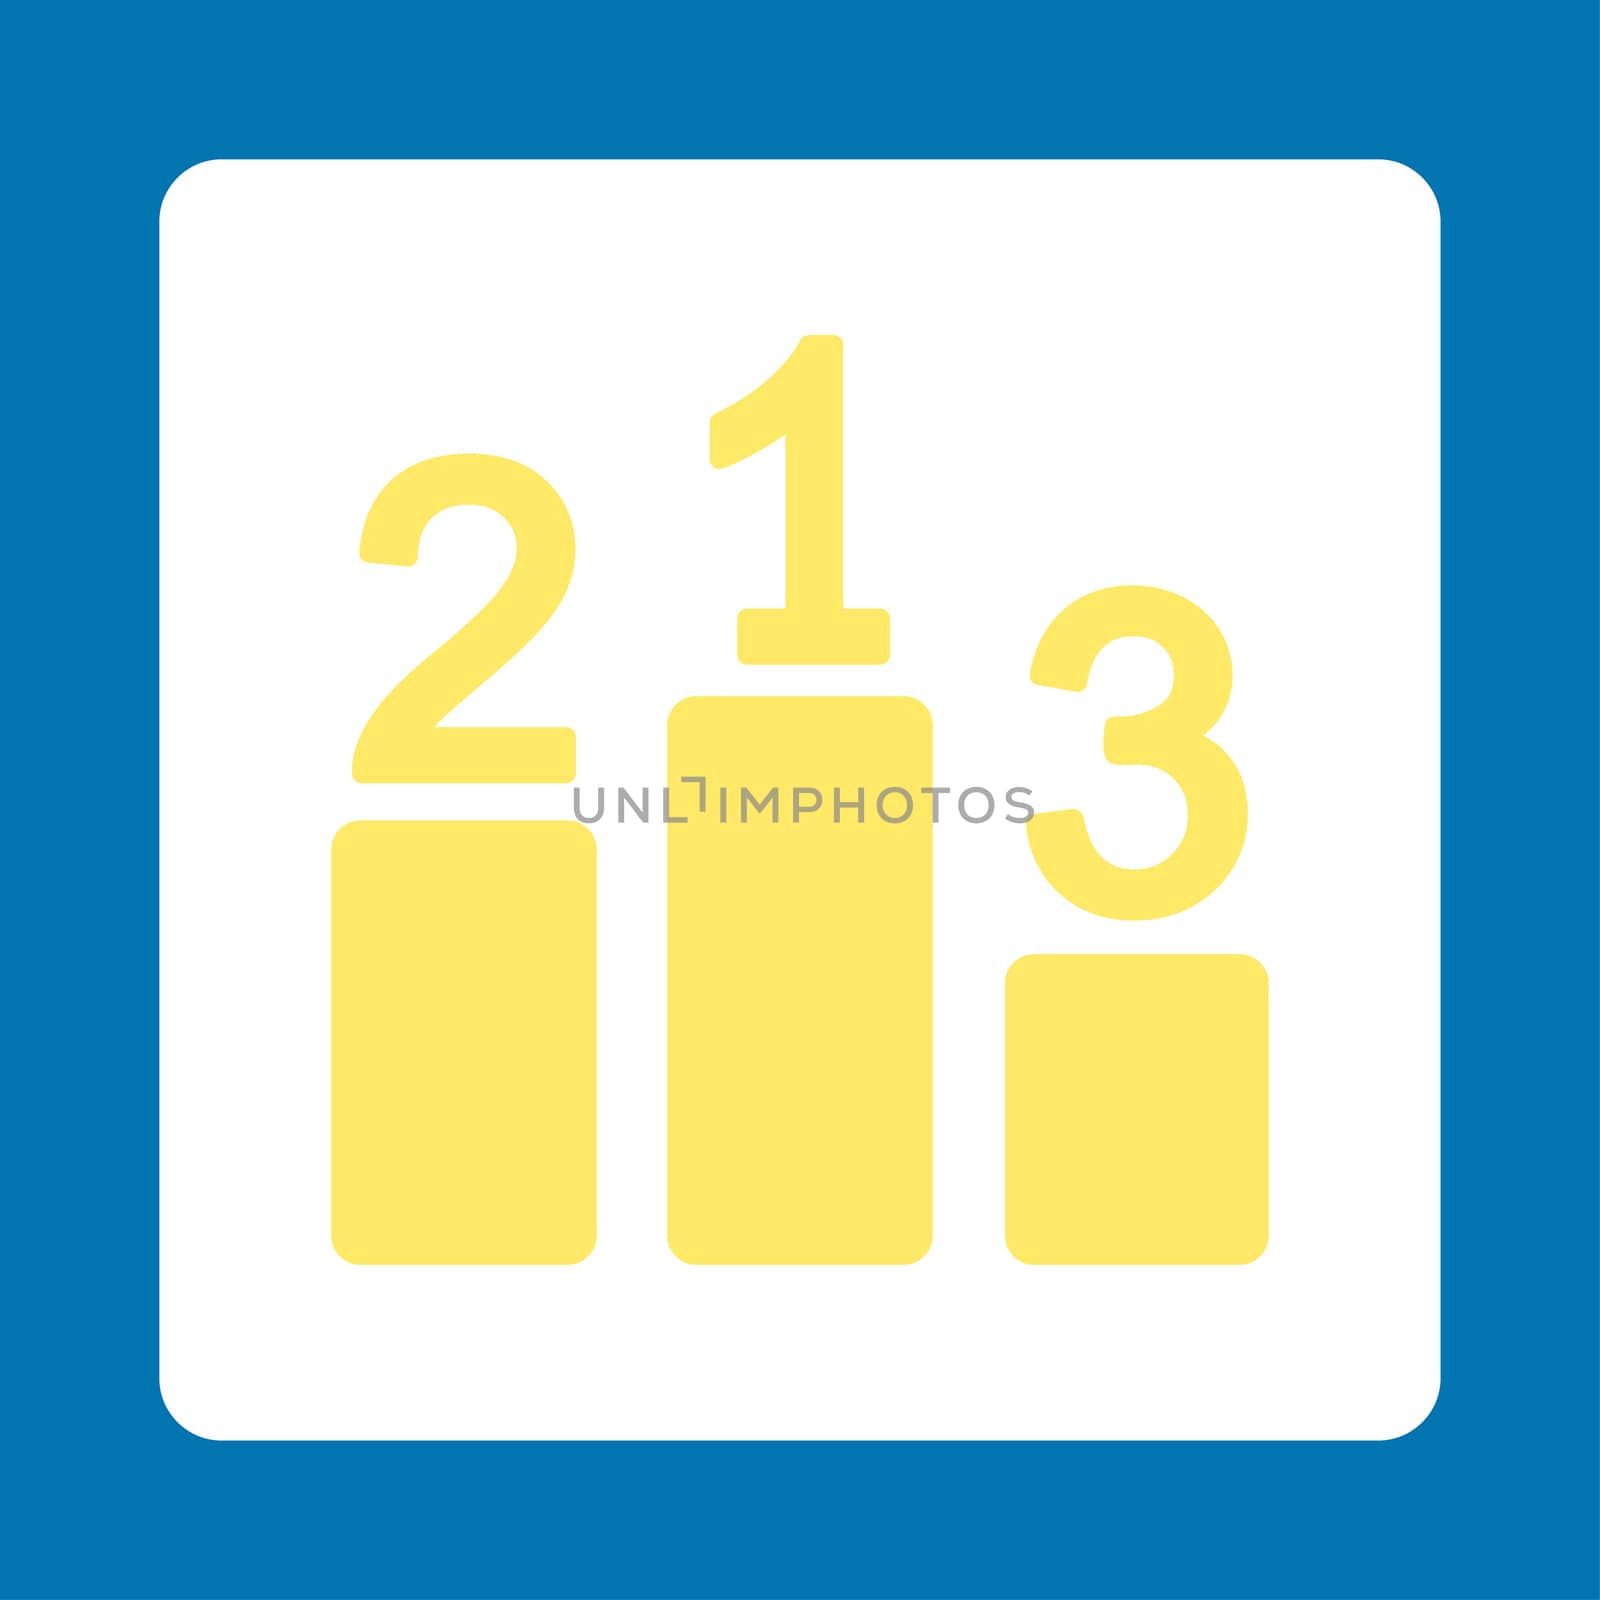 Pedestal icon from Award Buttons OverColor Set. Icon style is yellow and white colors, flat rounded square button, blue background.